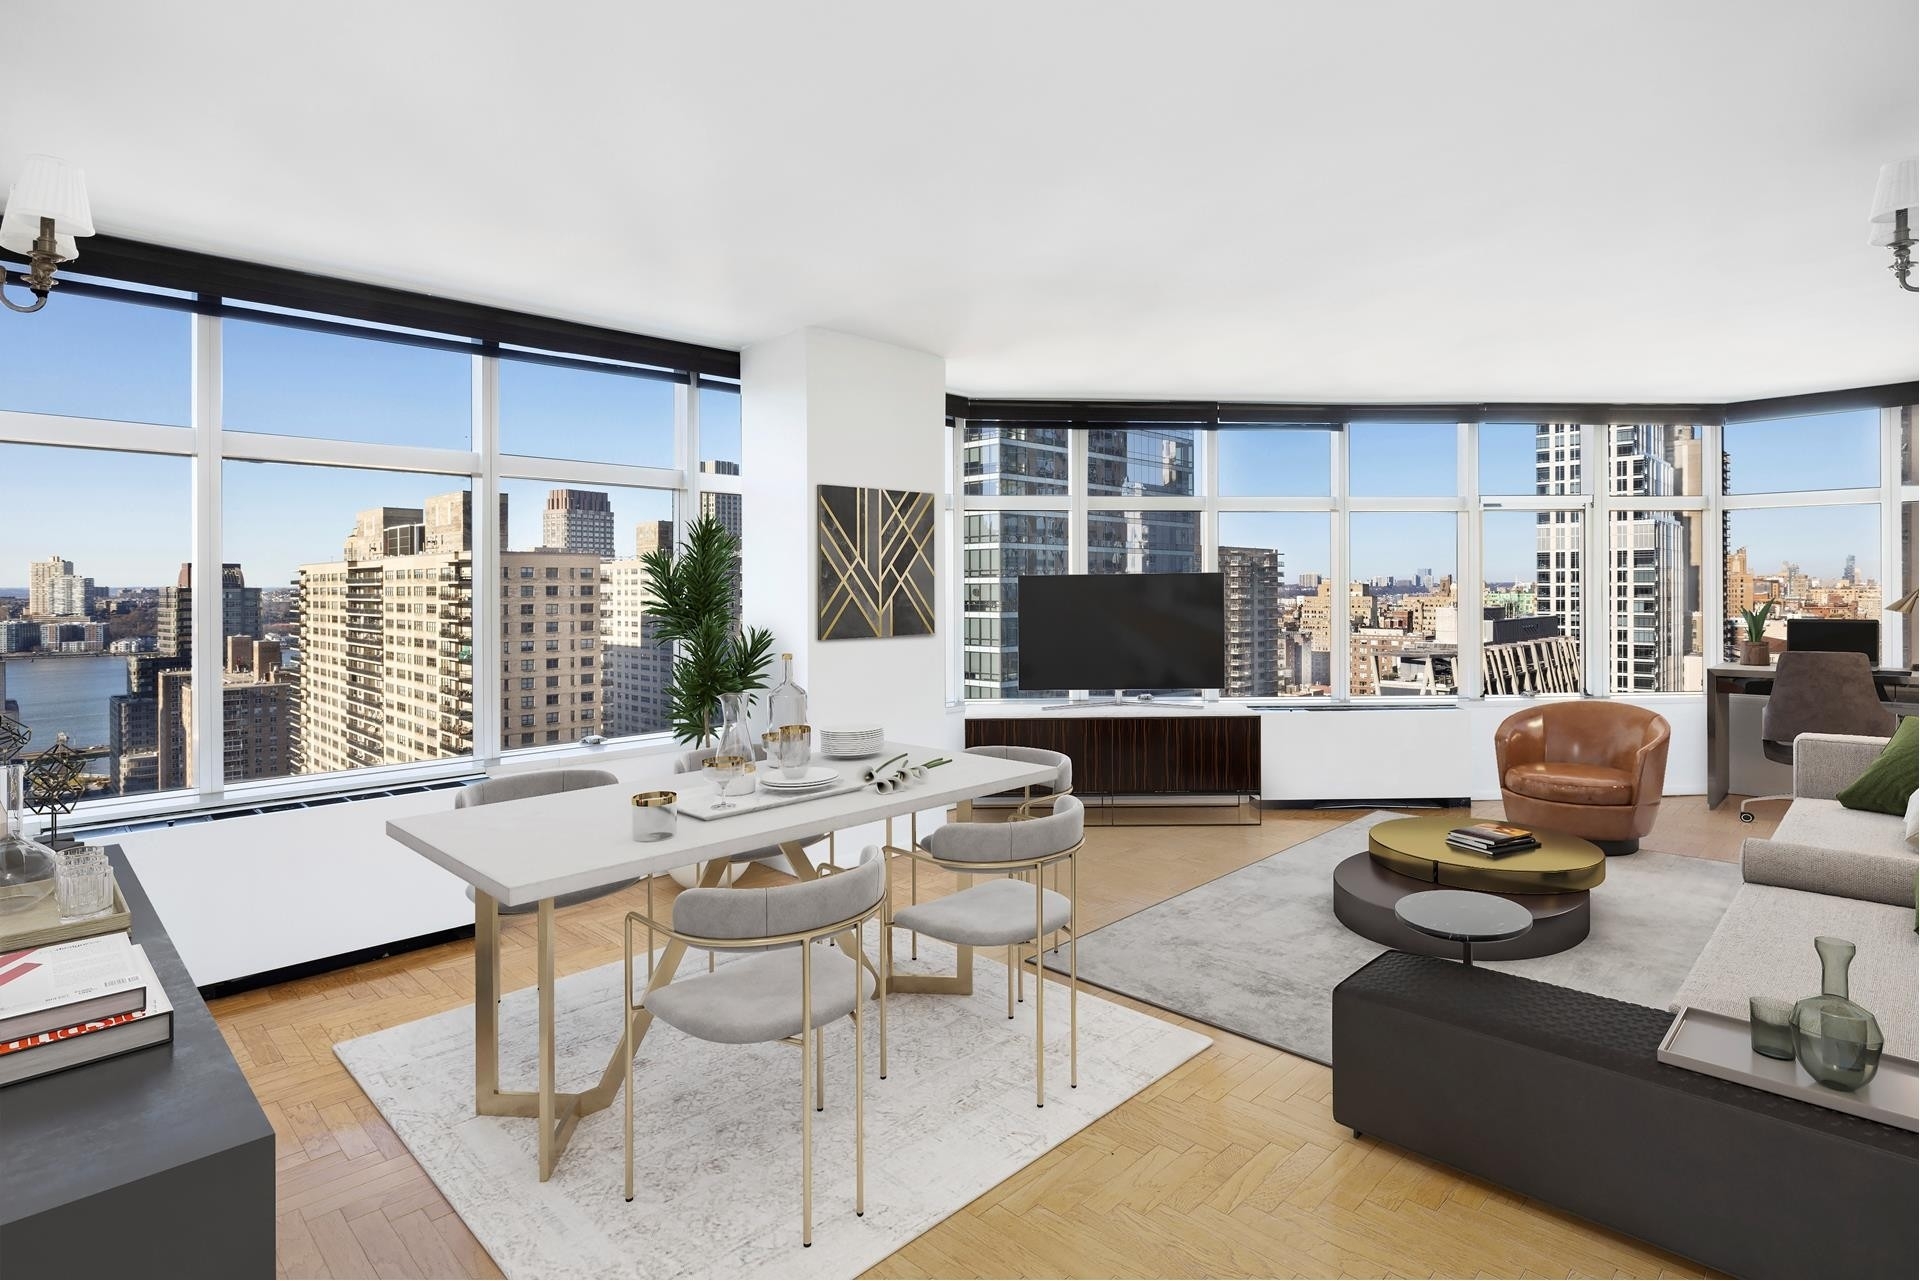 Property at 3 Lincoln Center, 160 W 66TH ST, 25B Lincoln Square, New York, New York 10023